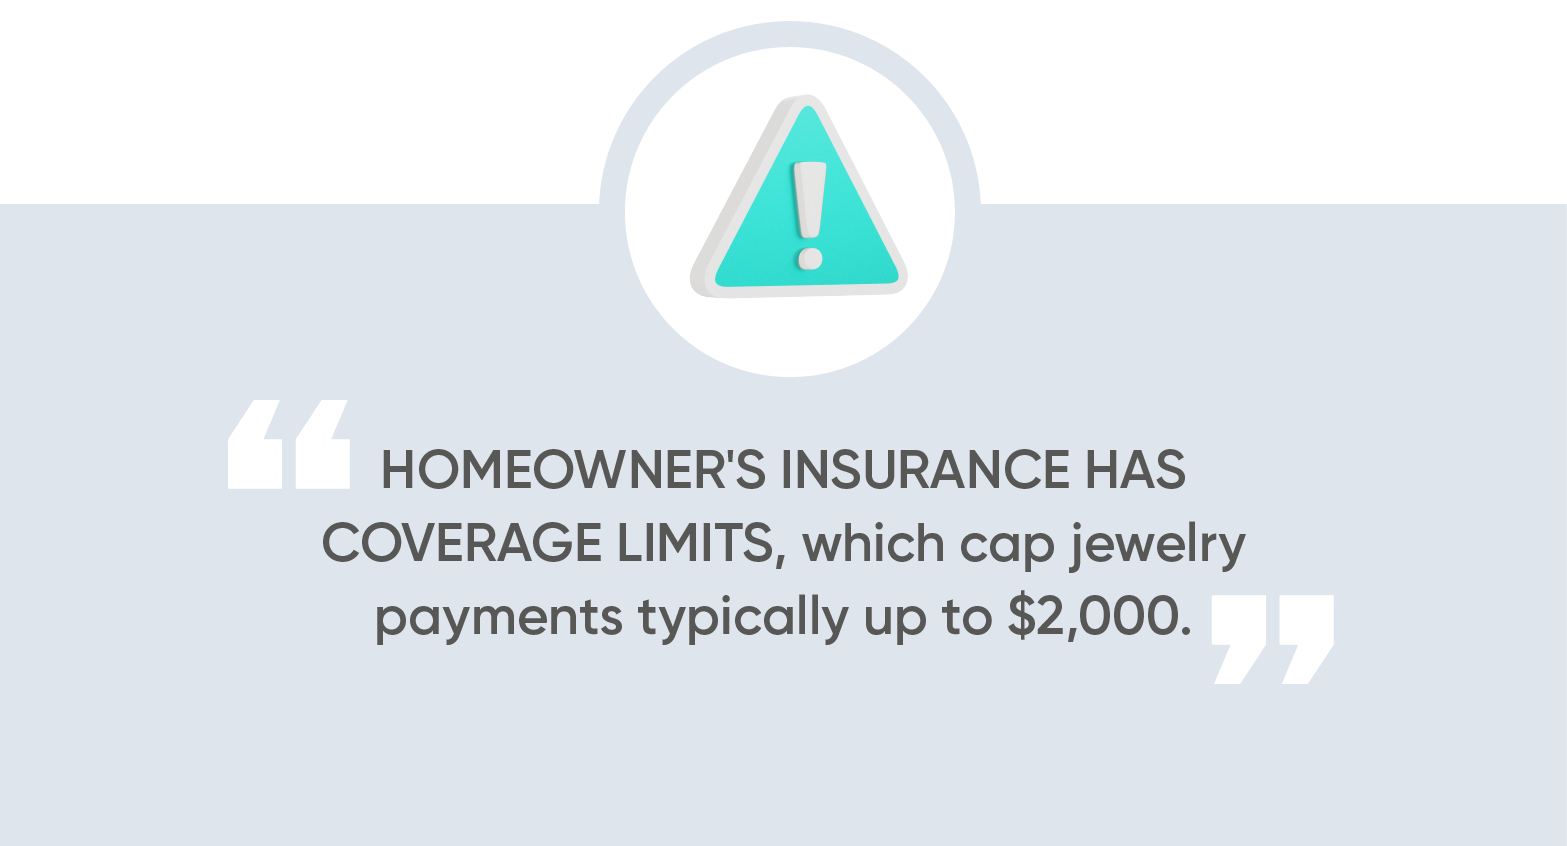 Homeowner's insurance has coverage limits, which cap jewelry payments typically up to $2,000.